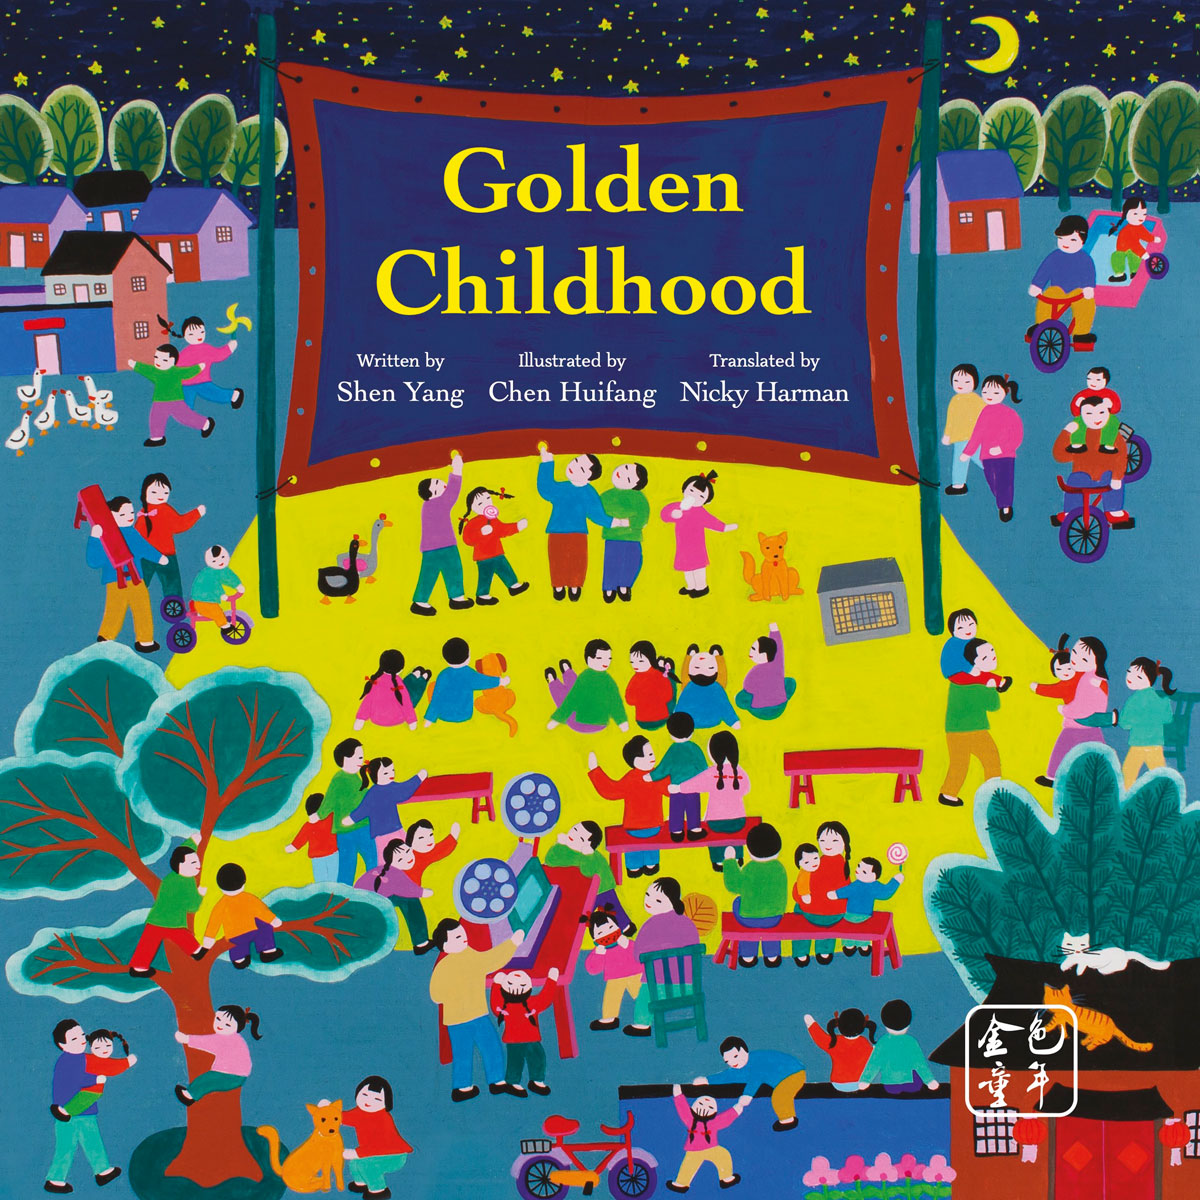 Golden Childhood: Art, Stories, and Translation, with Shen Yang and Nicky Harman